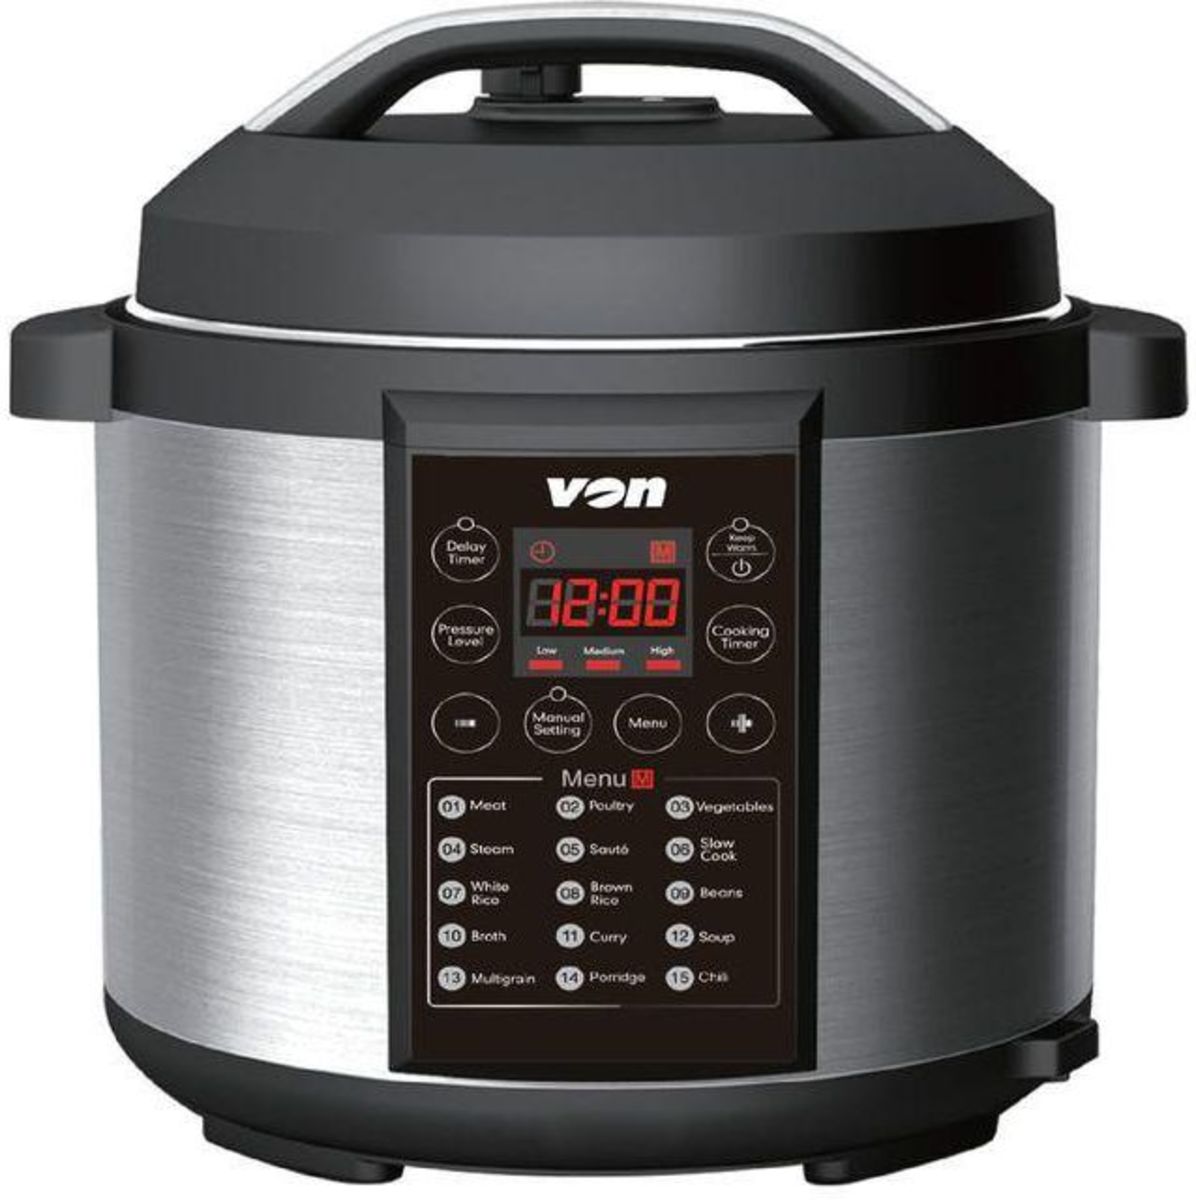 .Pre-paring your meal in a pressure cooker makes your entree ready in about half of the time it takes to prepare foods on your stovetop or in the oven.  The pressure cooker makes an airtight seal that builds up steam making you able to cook your food